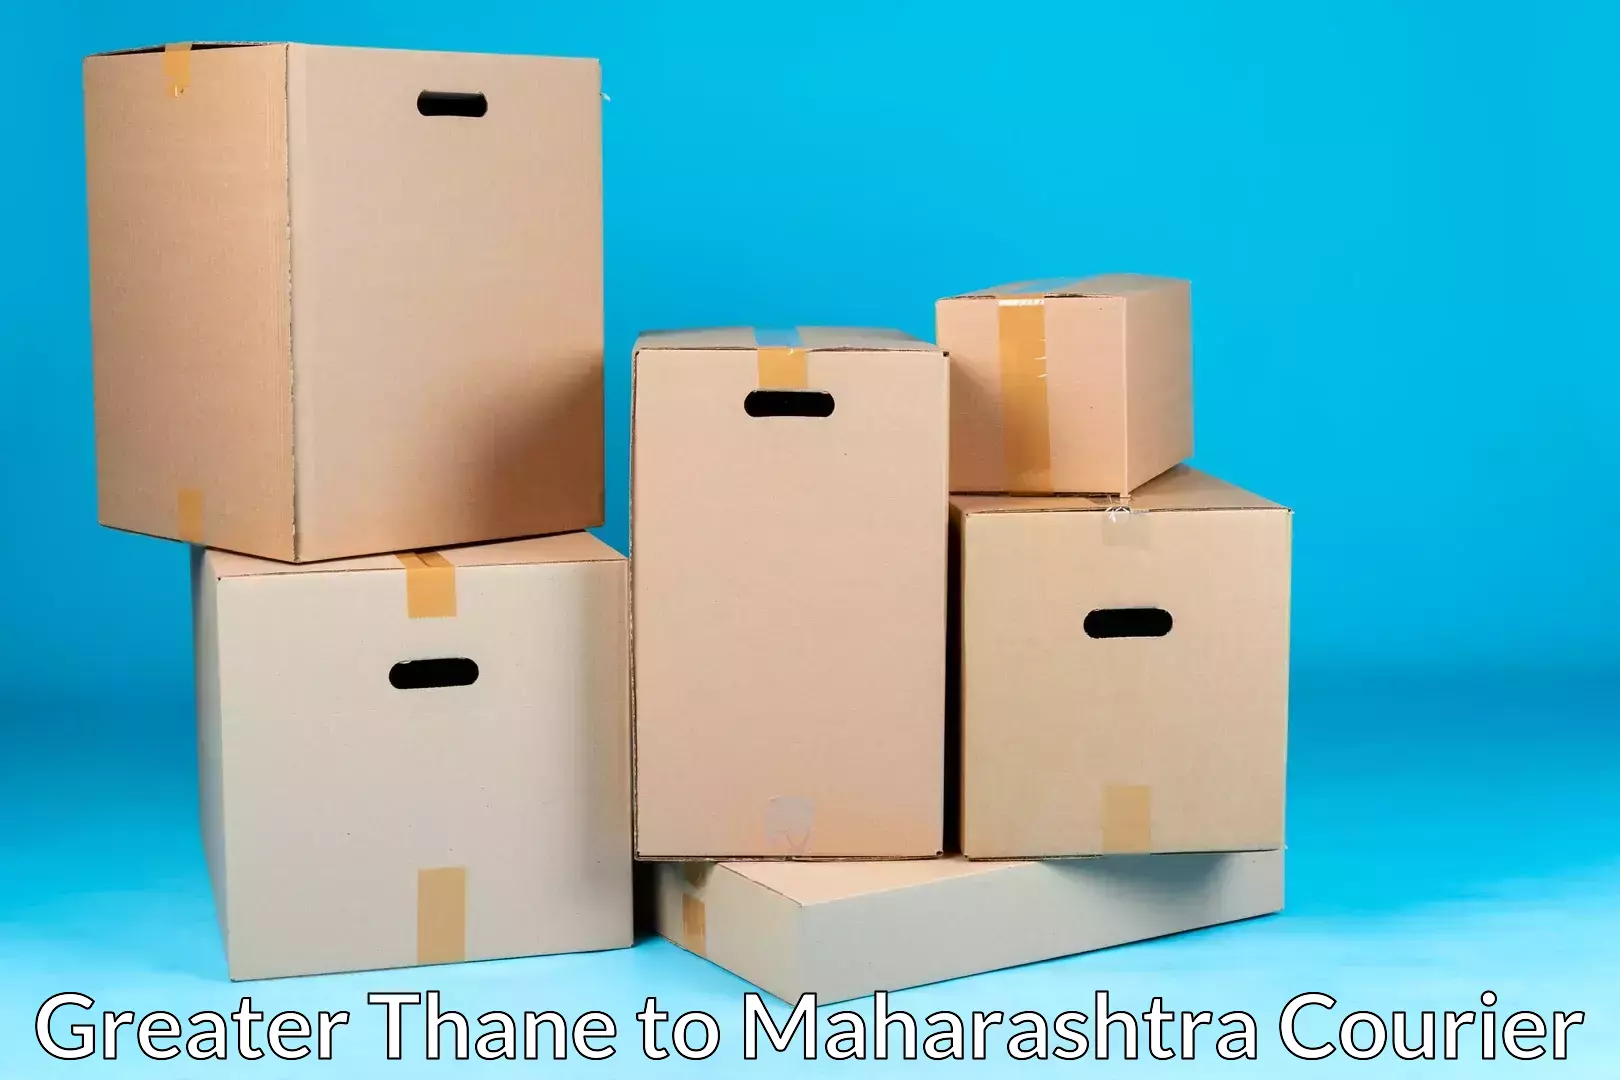 Reliable furniture movers Greater Thane to Greater Thane